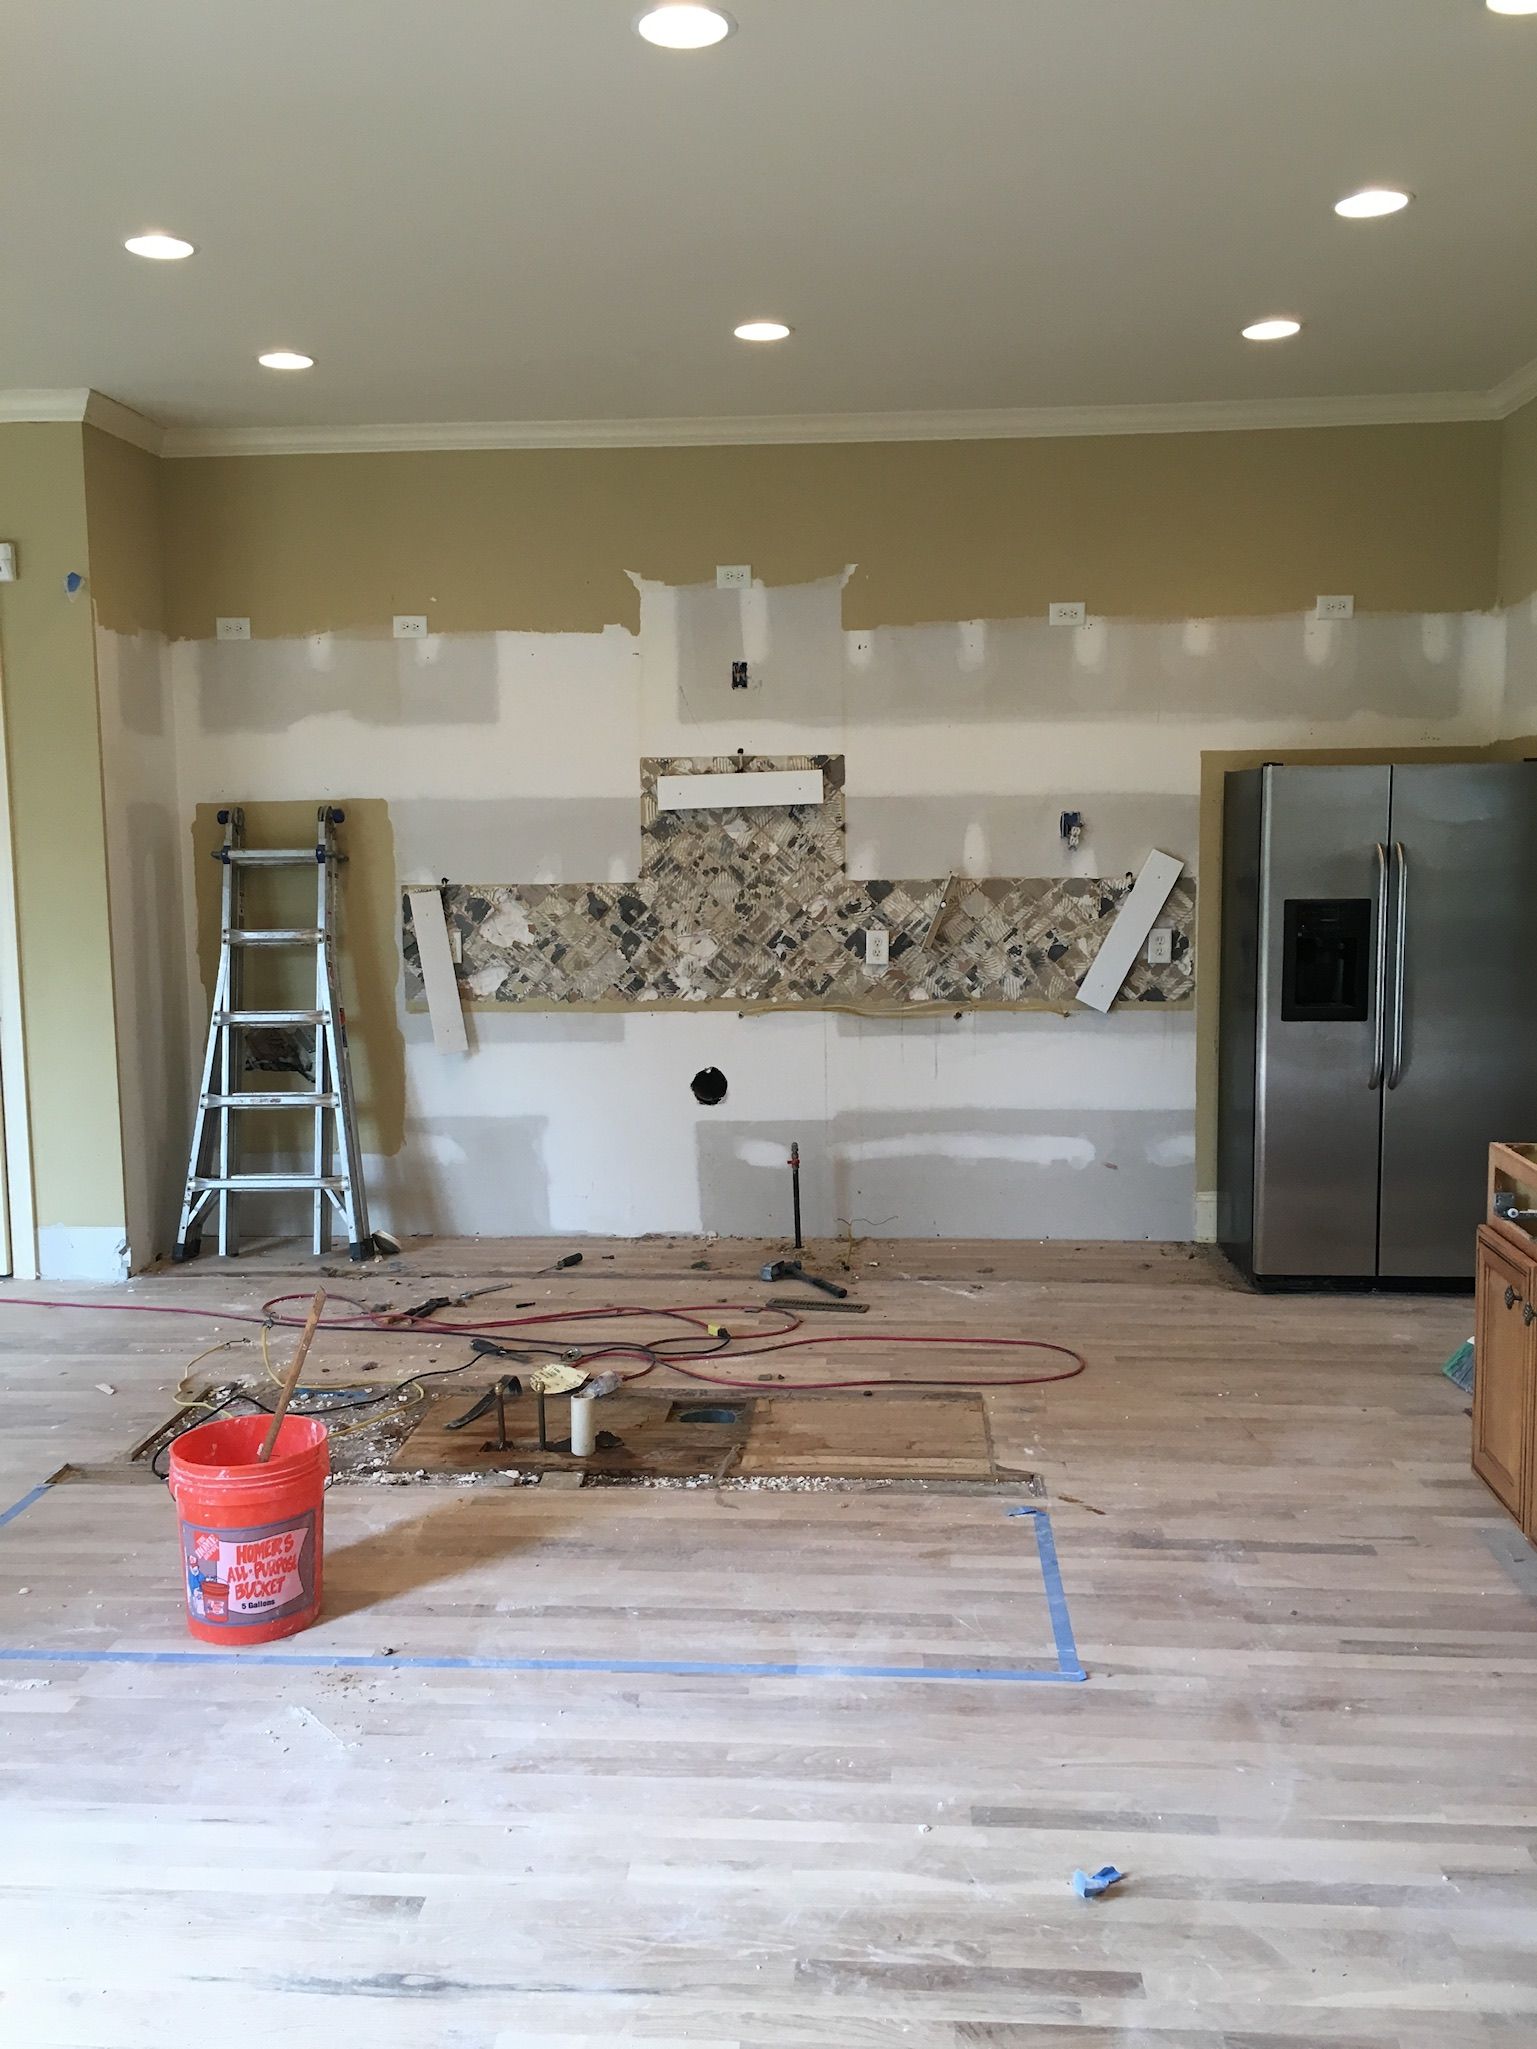 a kitchen under construction with a bucket of paint on the floor